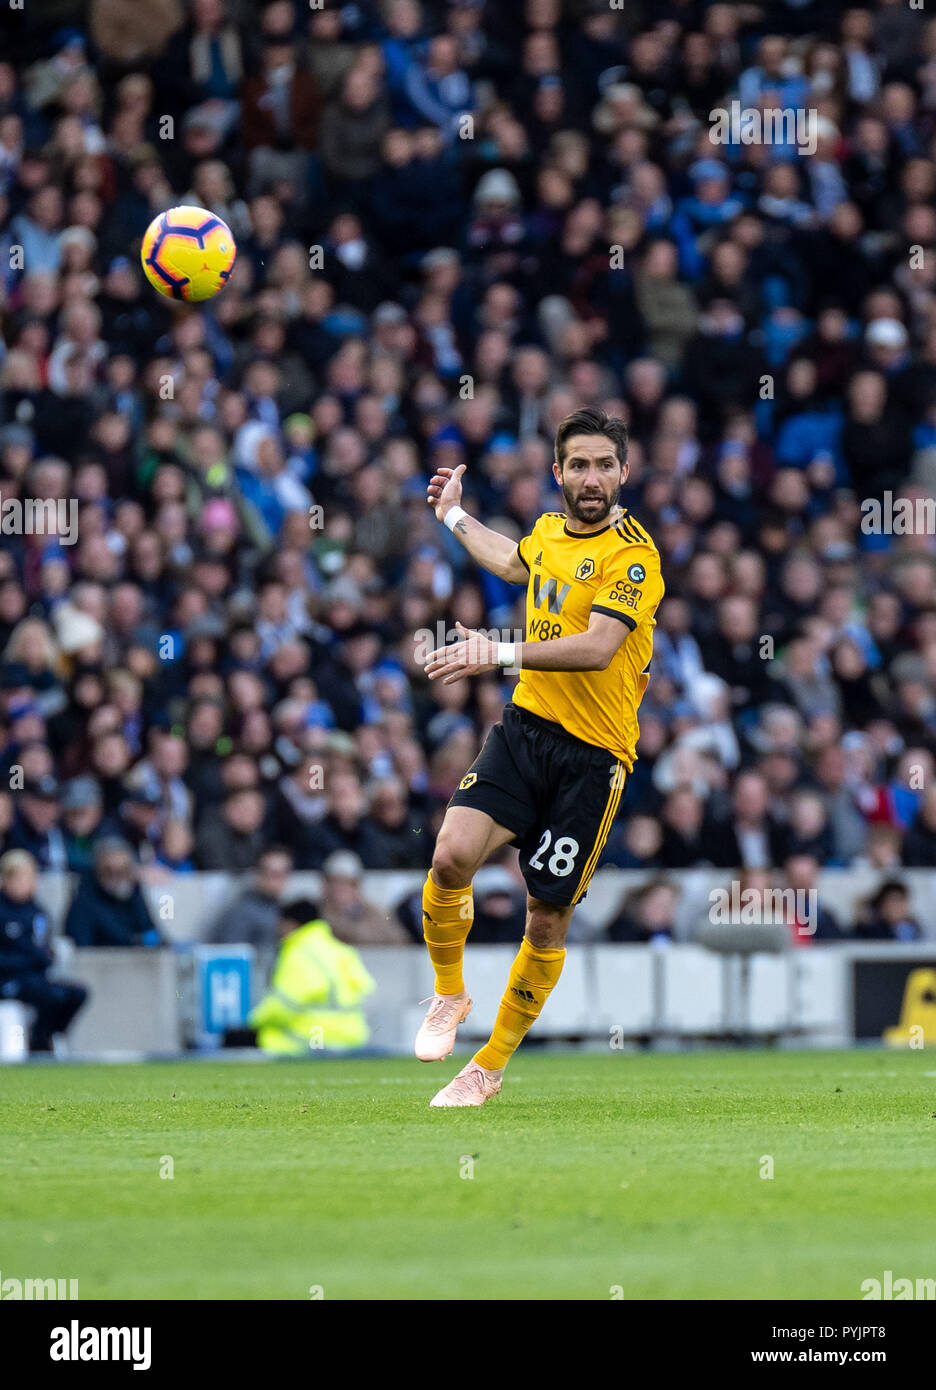 Brighton, UK. 27th Oct 2018. João Moutinho of Wolverhampton Wanderers during the Premier League match between Brighton and Hove Albion and Wolverhampton Wanderers at the AMEX Stadium, Brighton, England on 27 October 2018. Photo by Liam McAvoy. Credit: UK Sports Pics Ltd/Alamy Live News Stock Photo